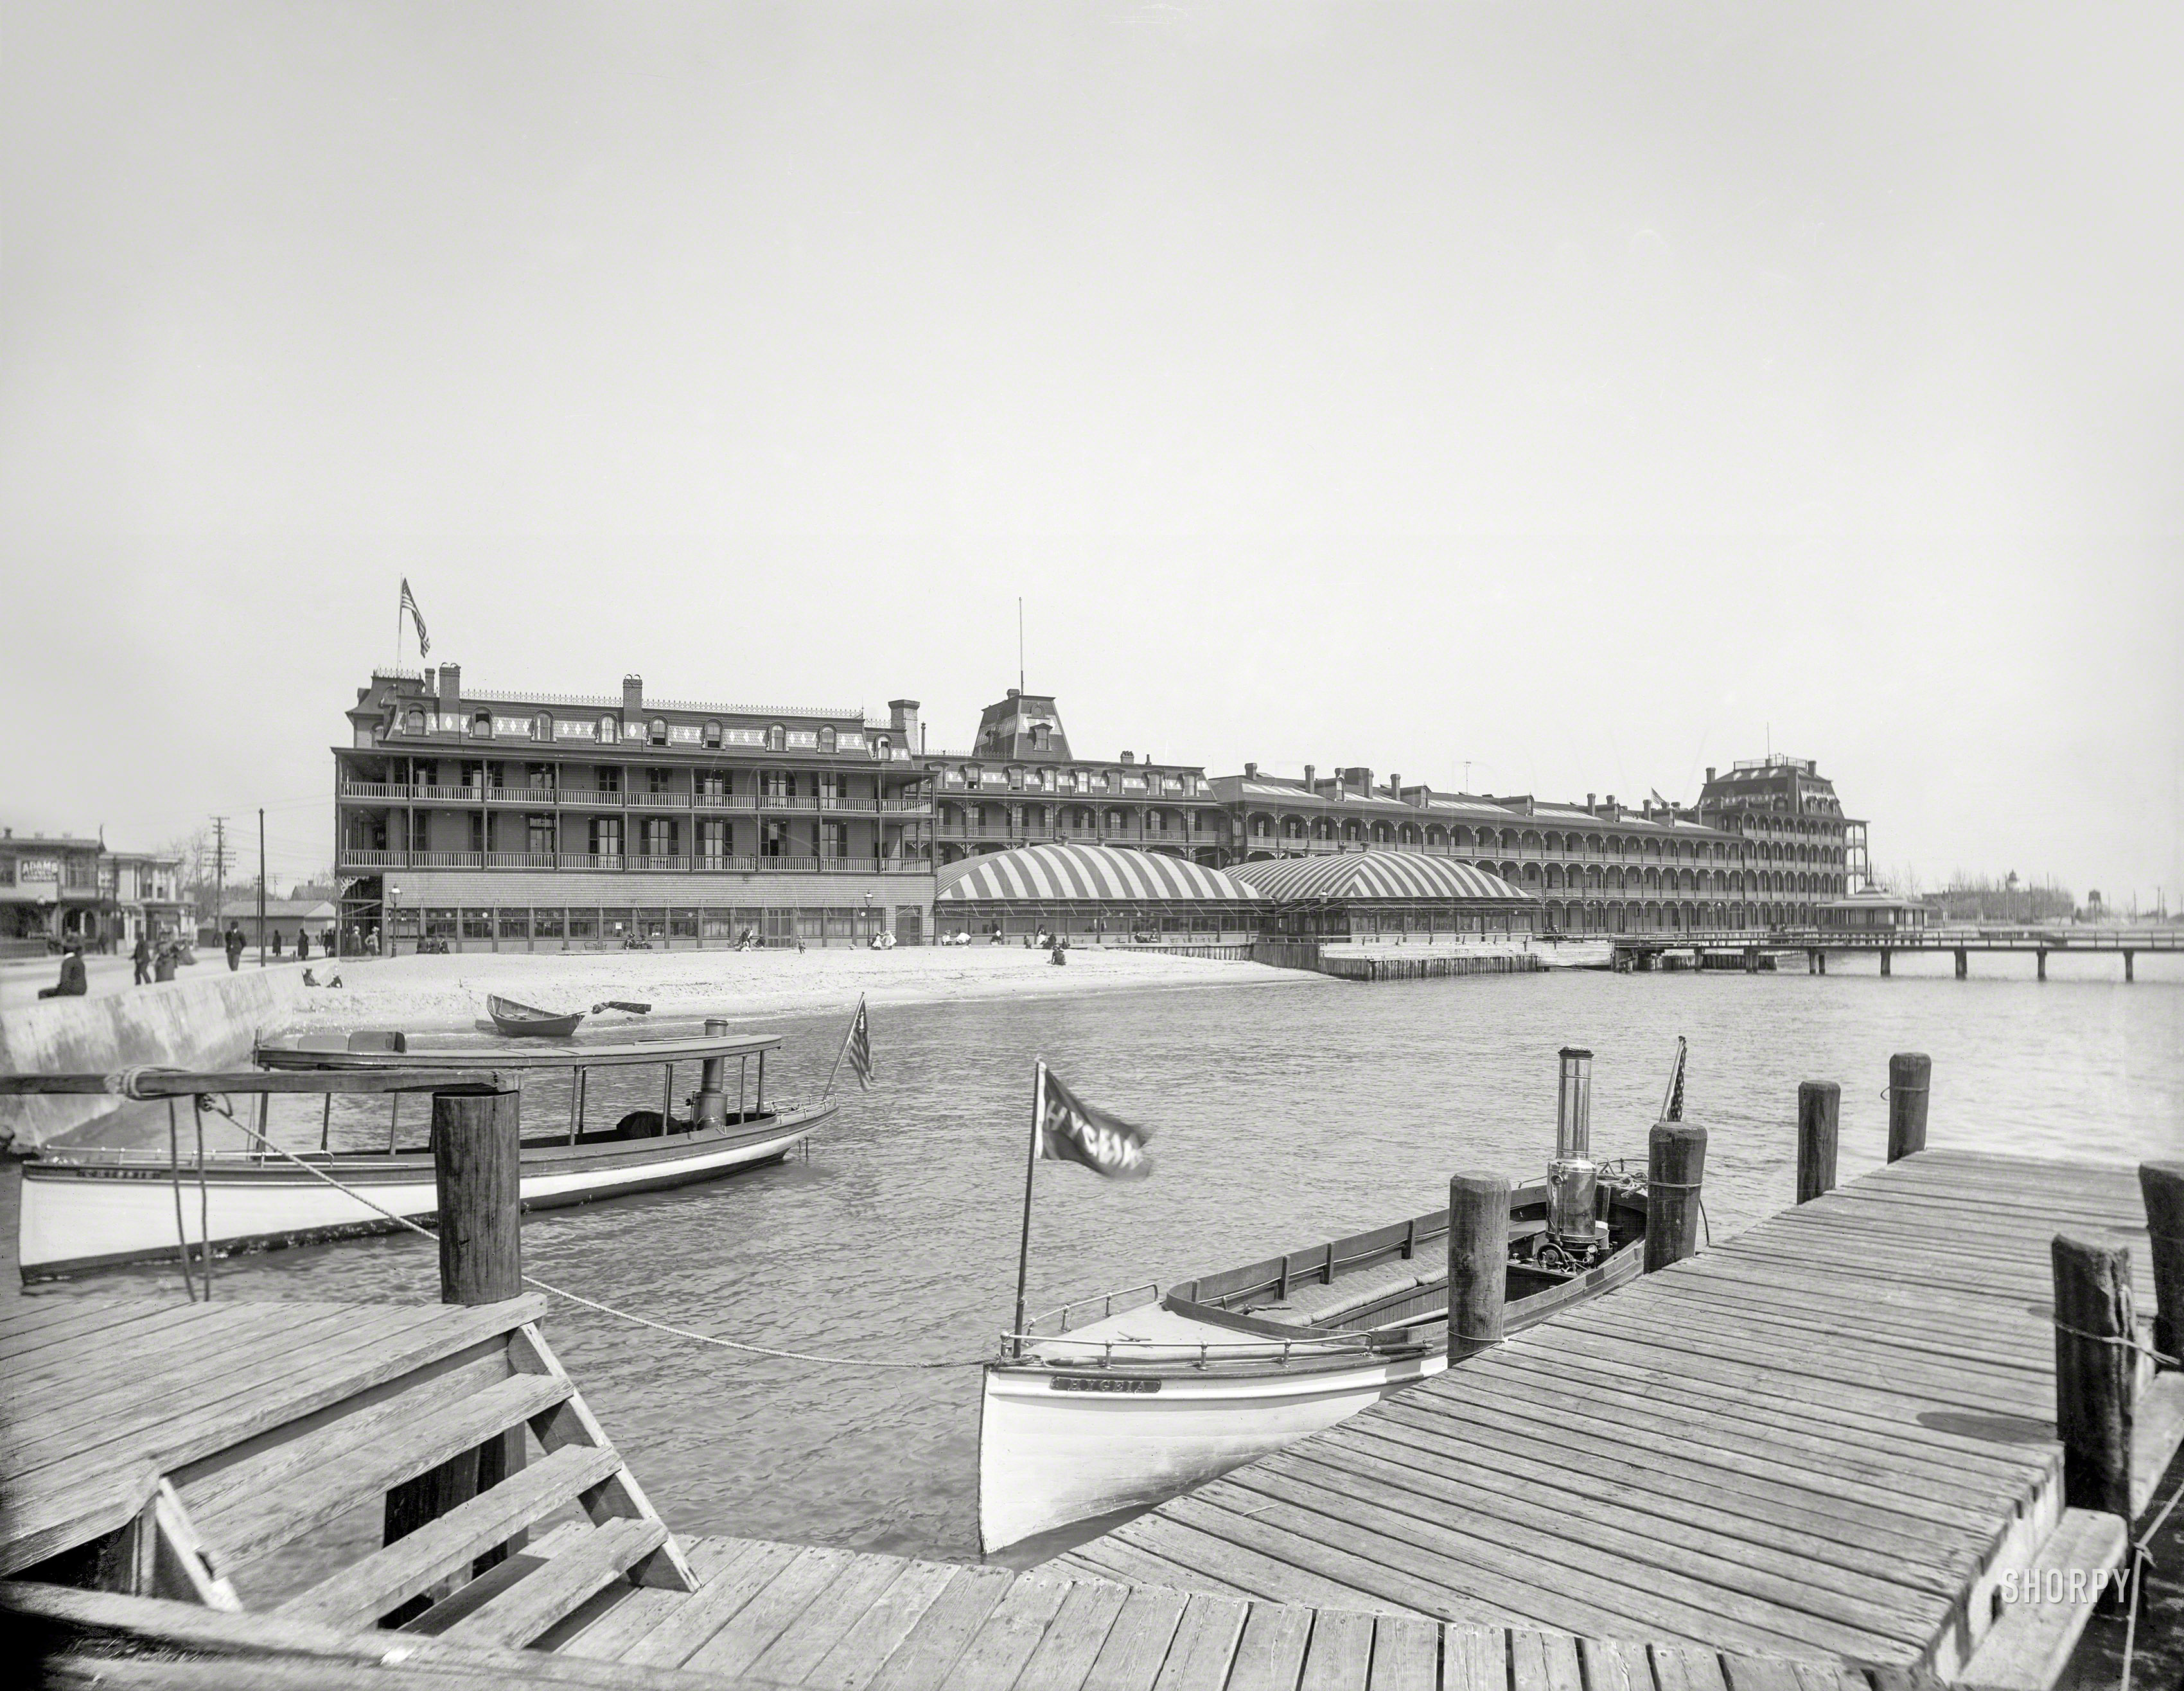 Hampton Roads, Virginia, circa 1895. "Hygeia Hotel, Old Point Comfort." 8x10 inch dry plate glass negative by William Henry Jackson. View full size.